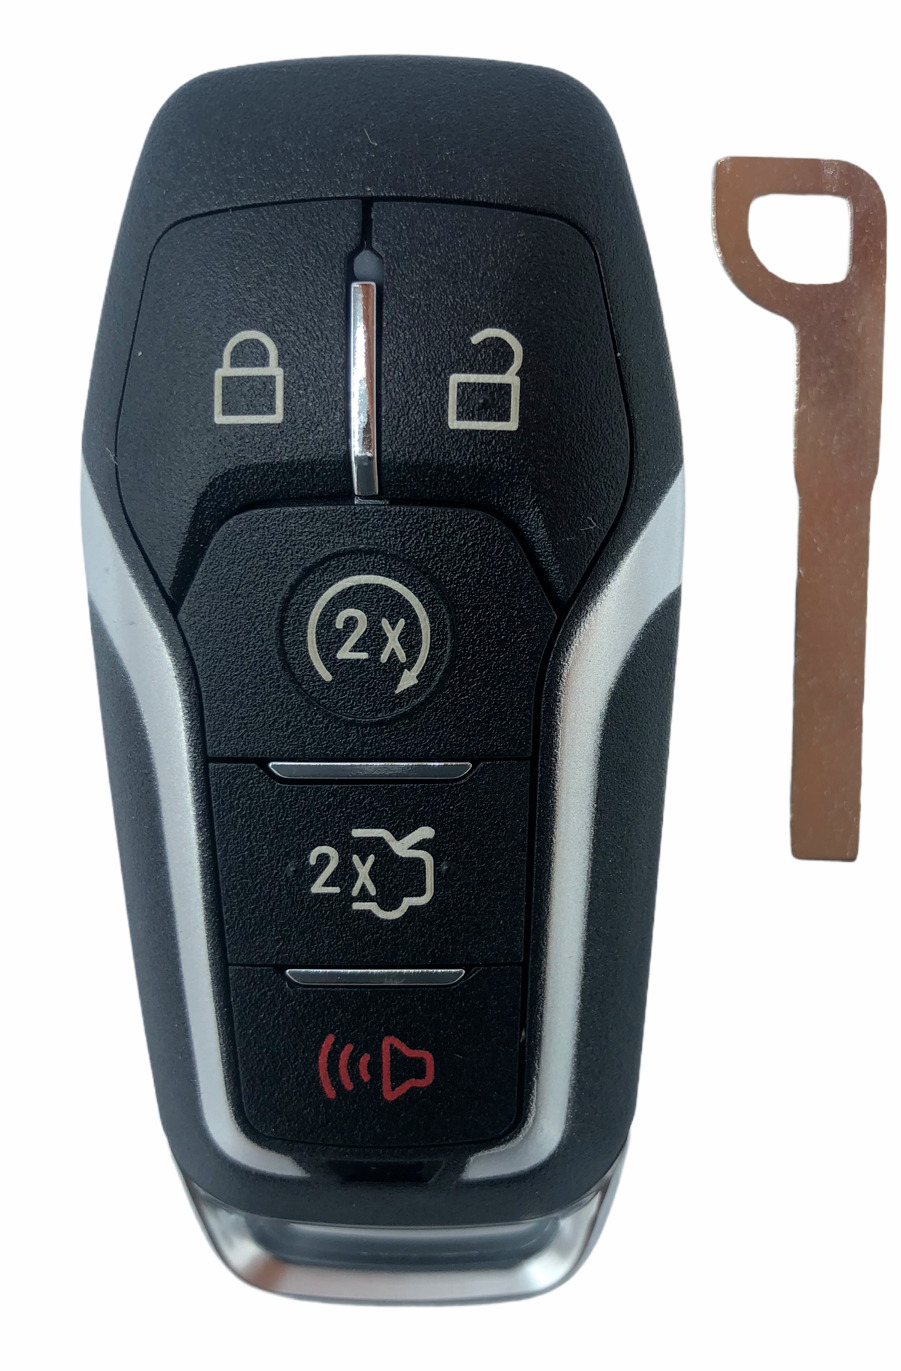 For Ford Mustang 2015 2016 2017 Smart Key Remote Key M3N-A2C31243300 164-R8119